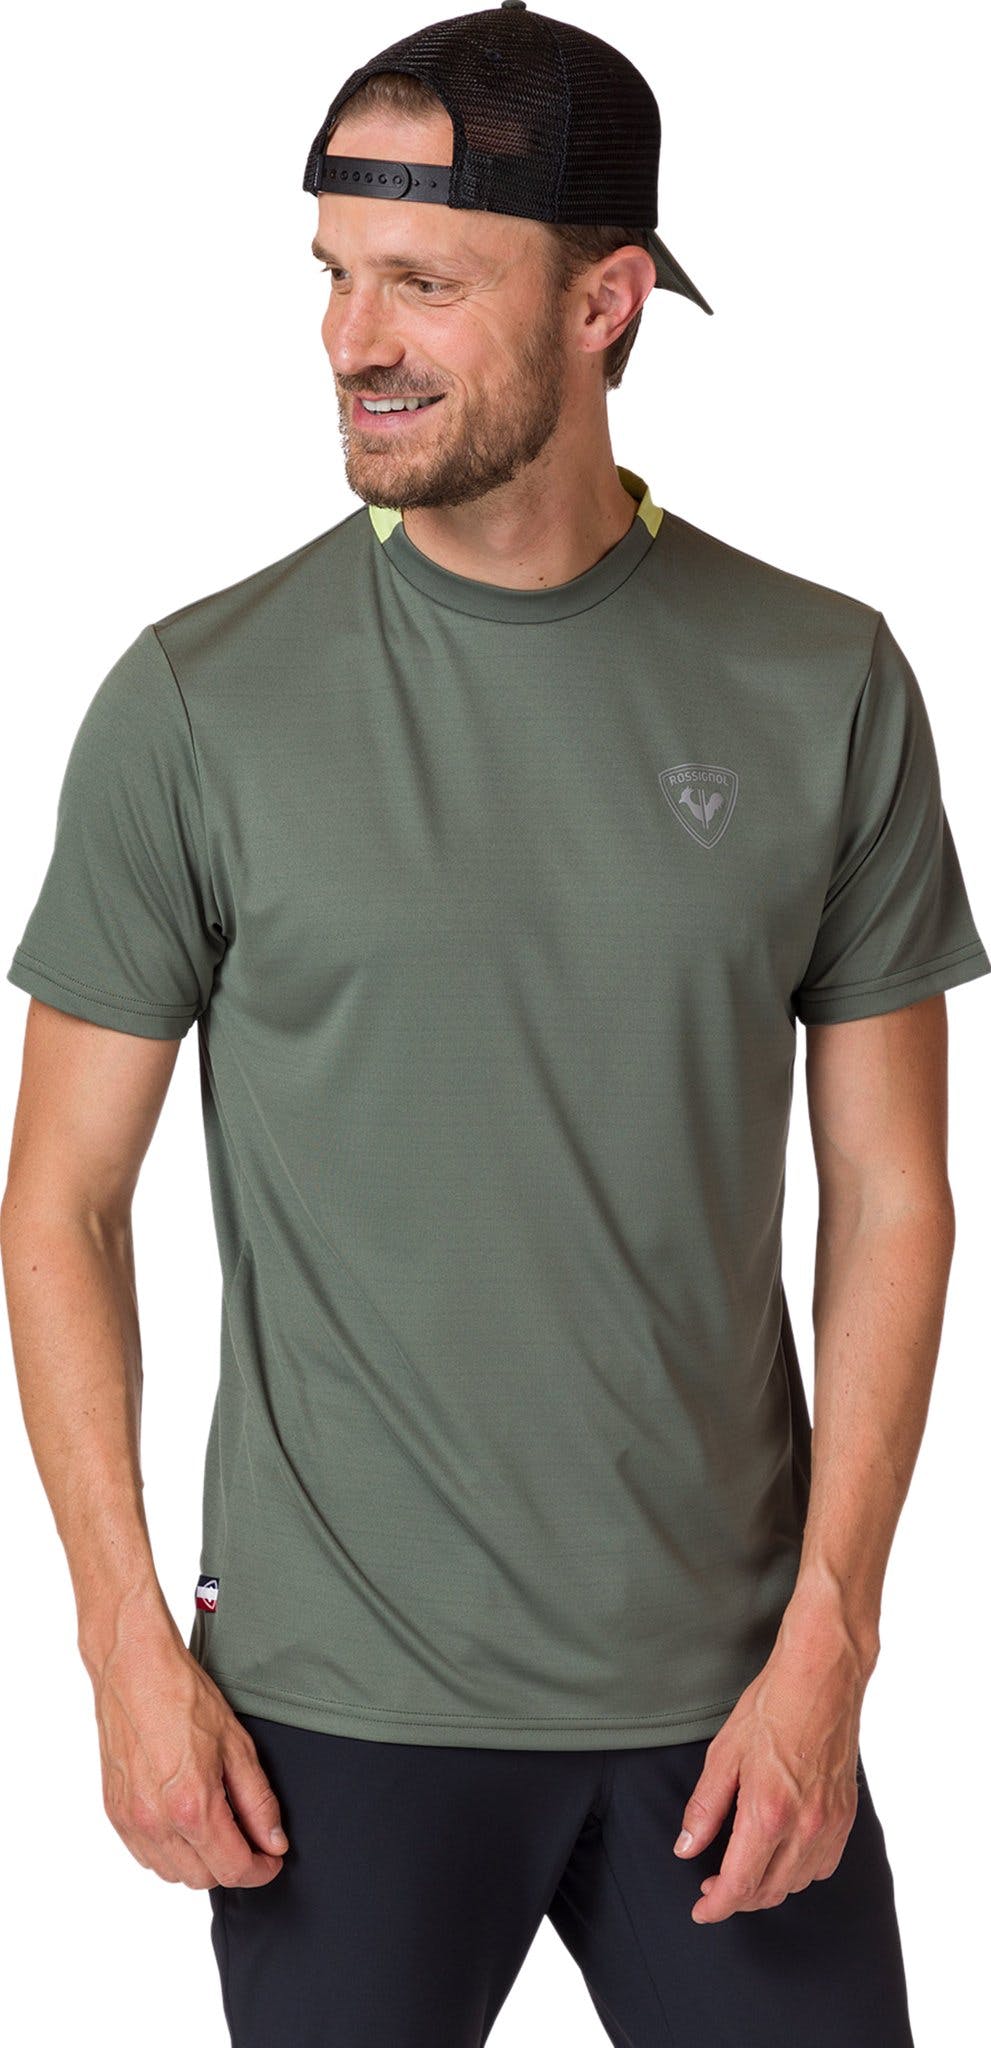 Product image for Active Tee - Men's